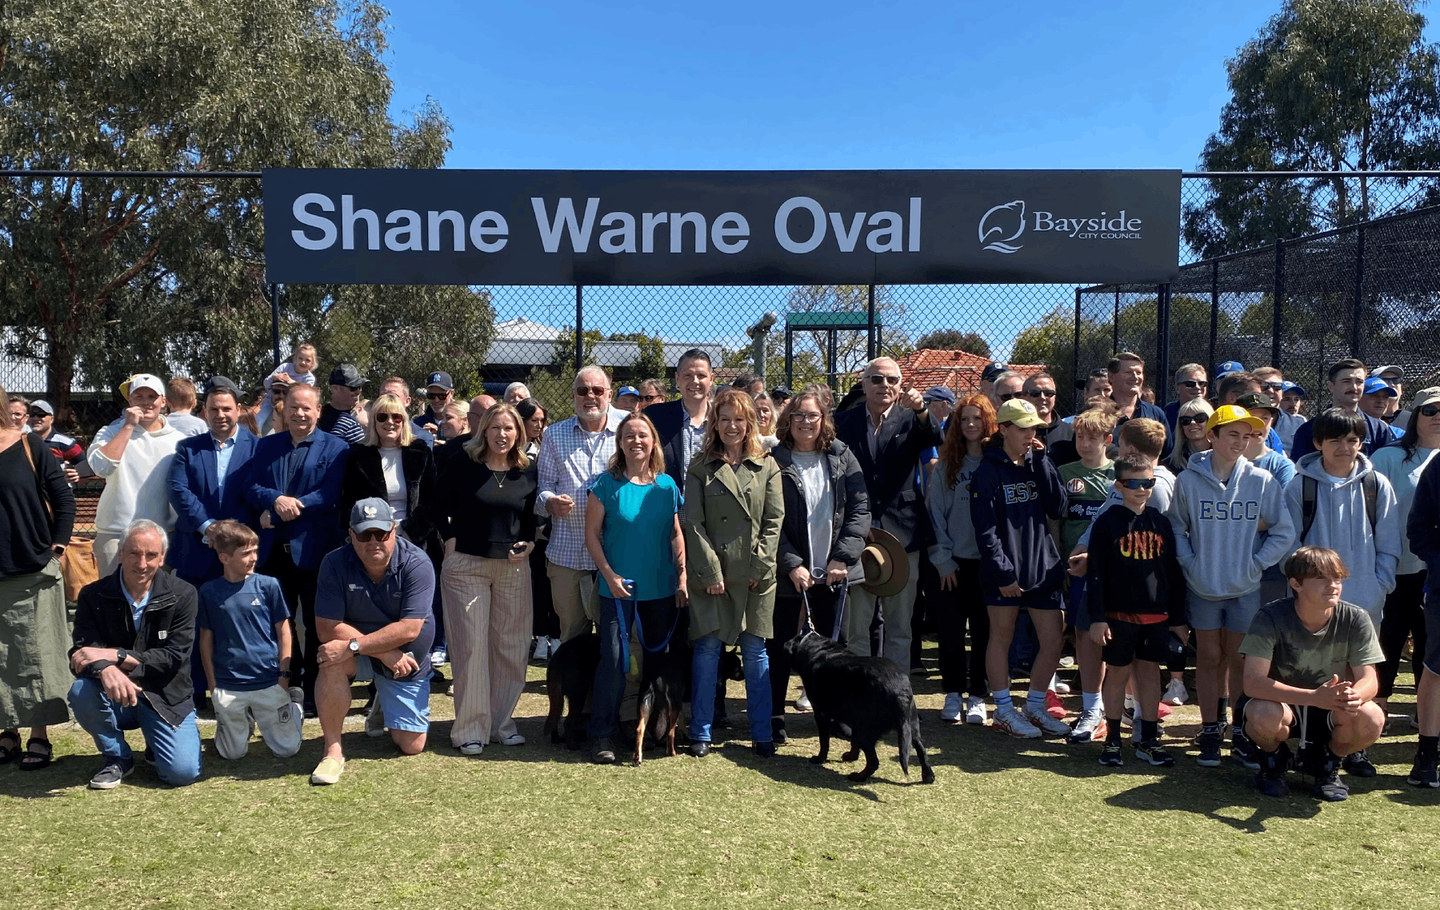 People standing in front of Shane Warne Oval sign